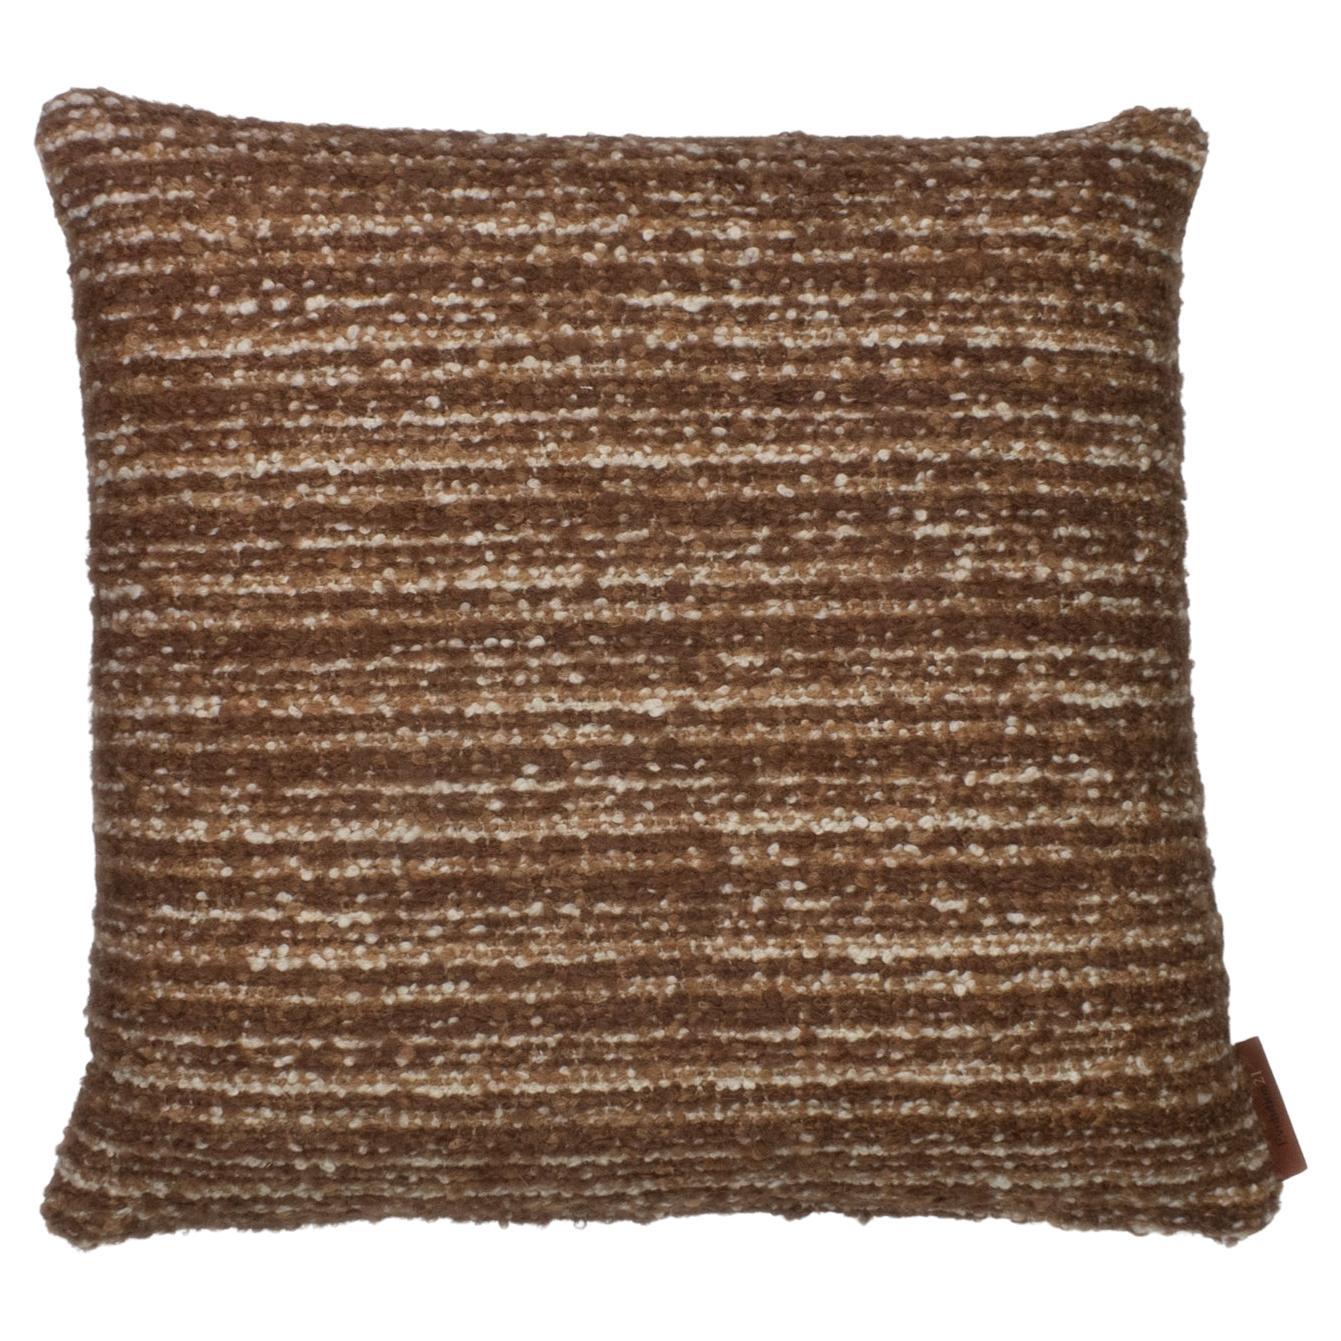 Cushion / Pillow Colorado Brown by Evolution21